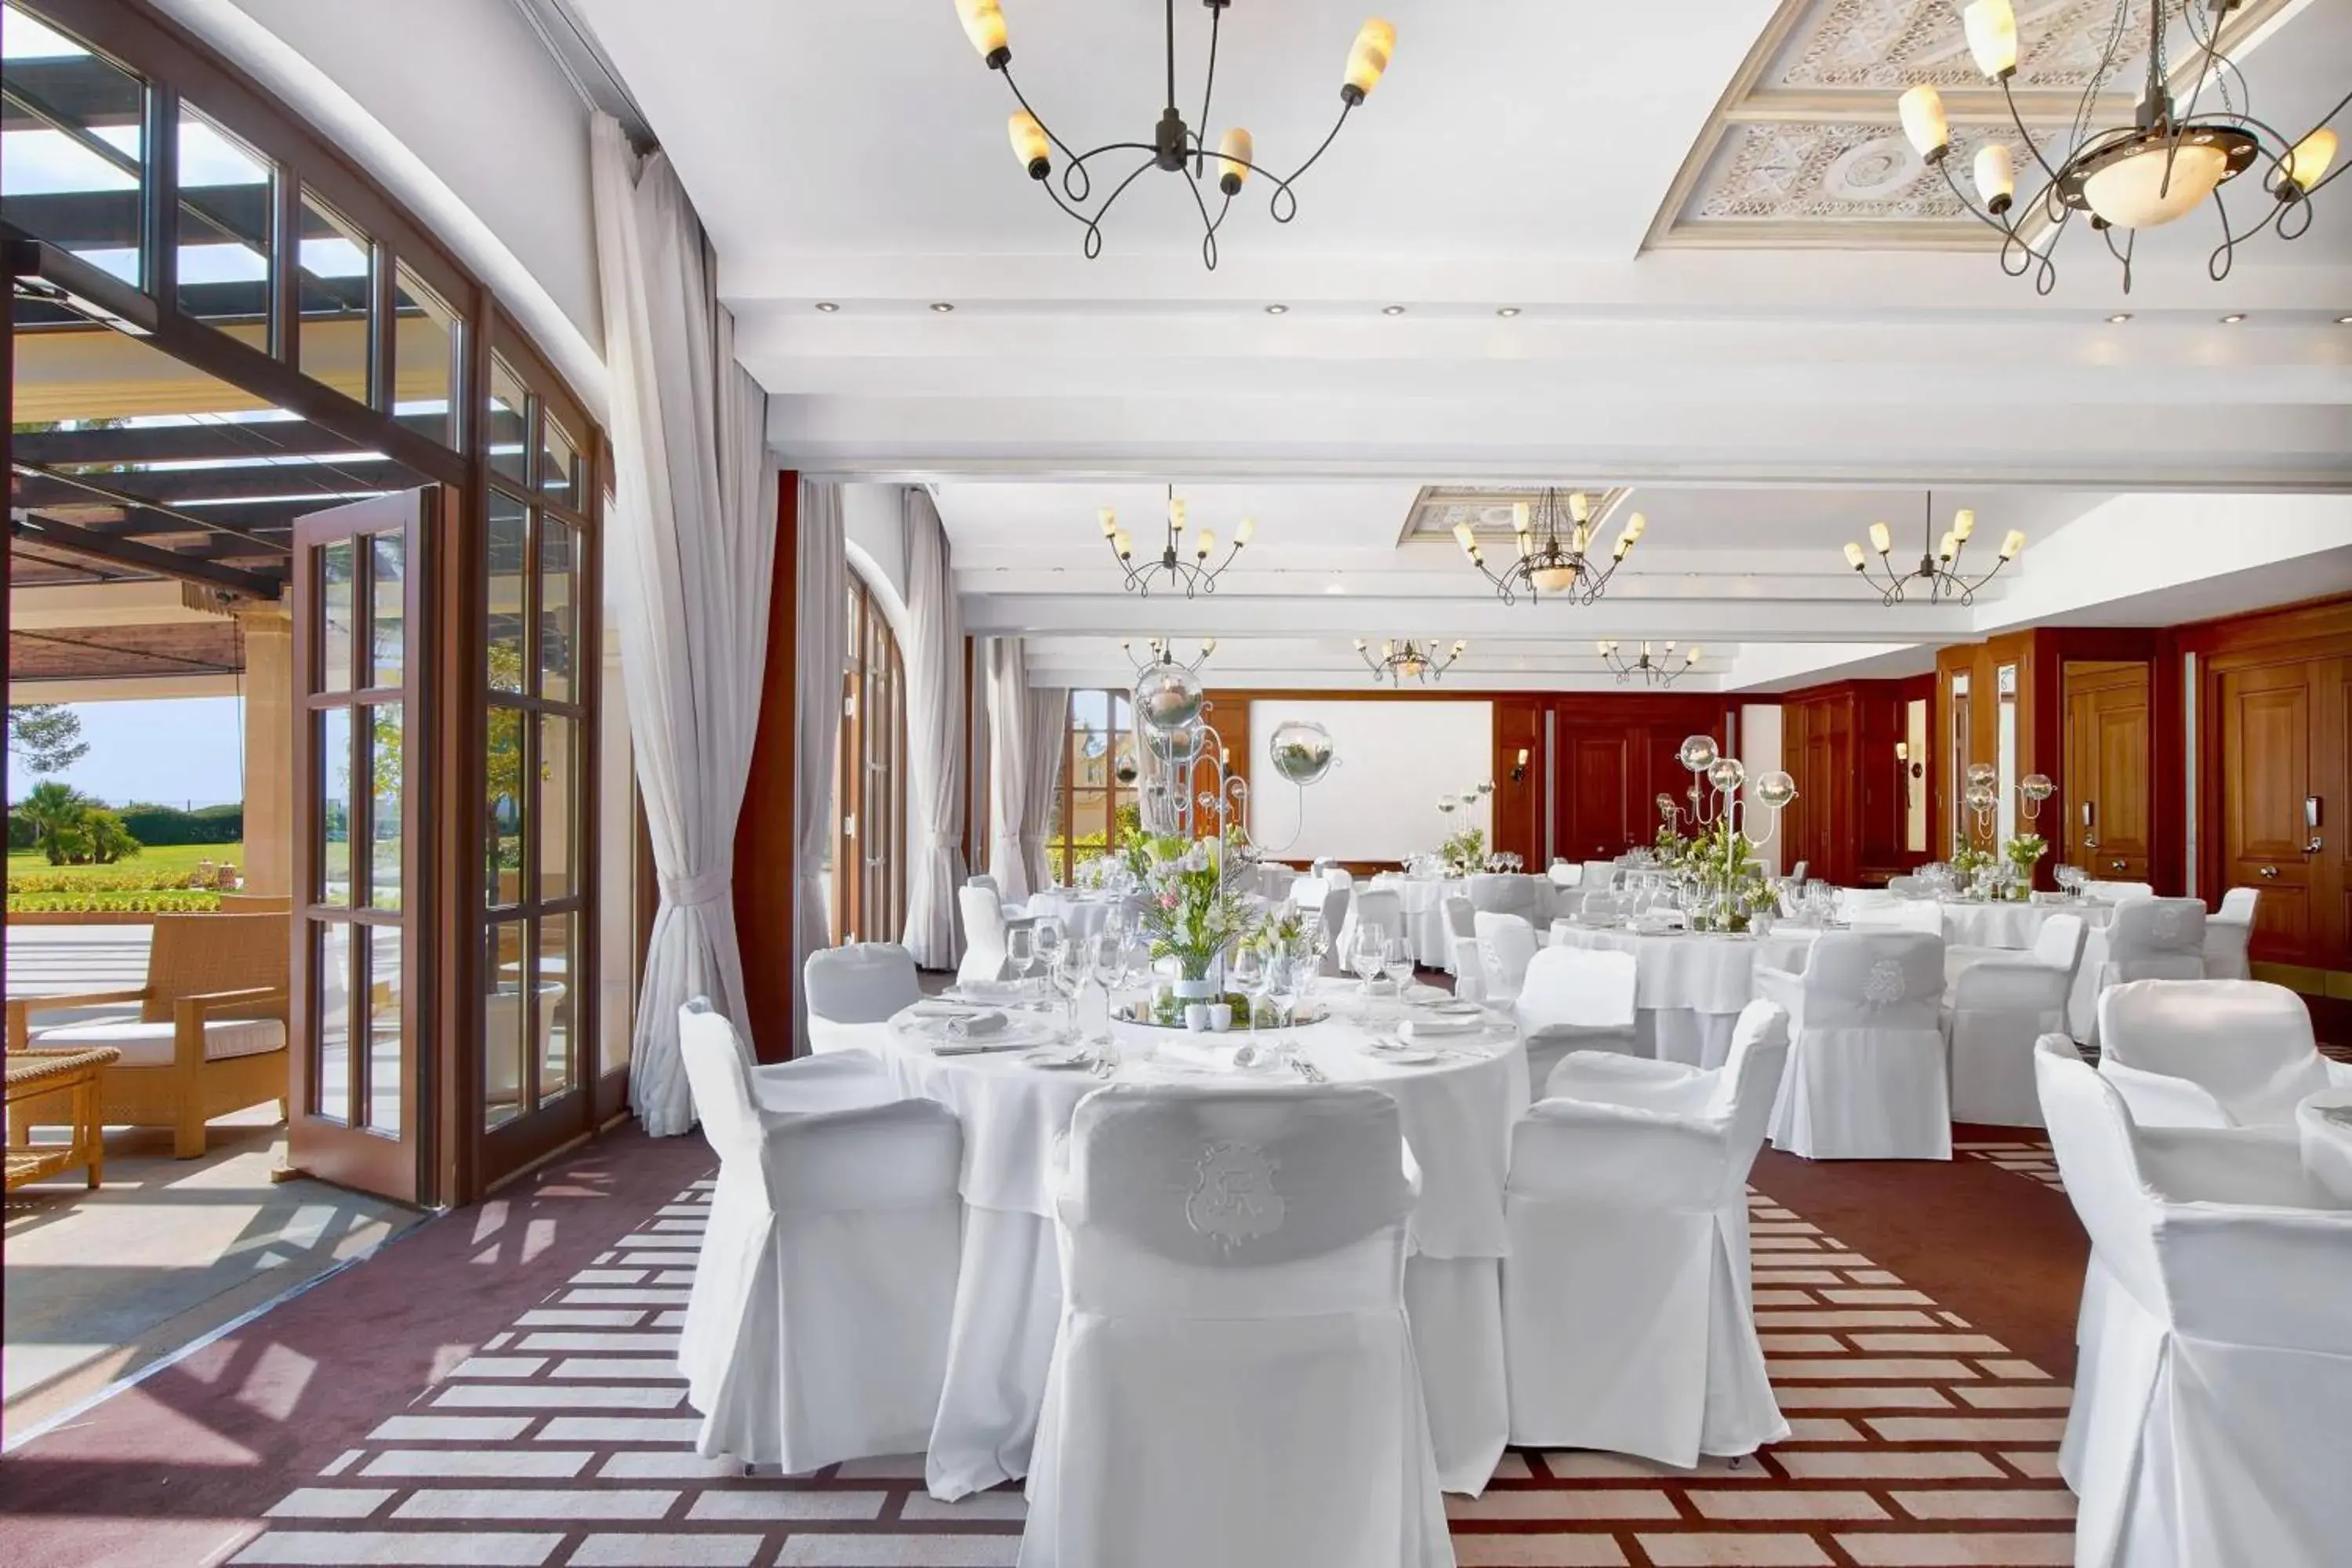 Other, Banquet Facilities in The St. Regis Mardavall Mallorca Resort